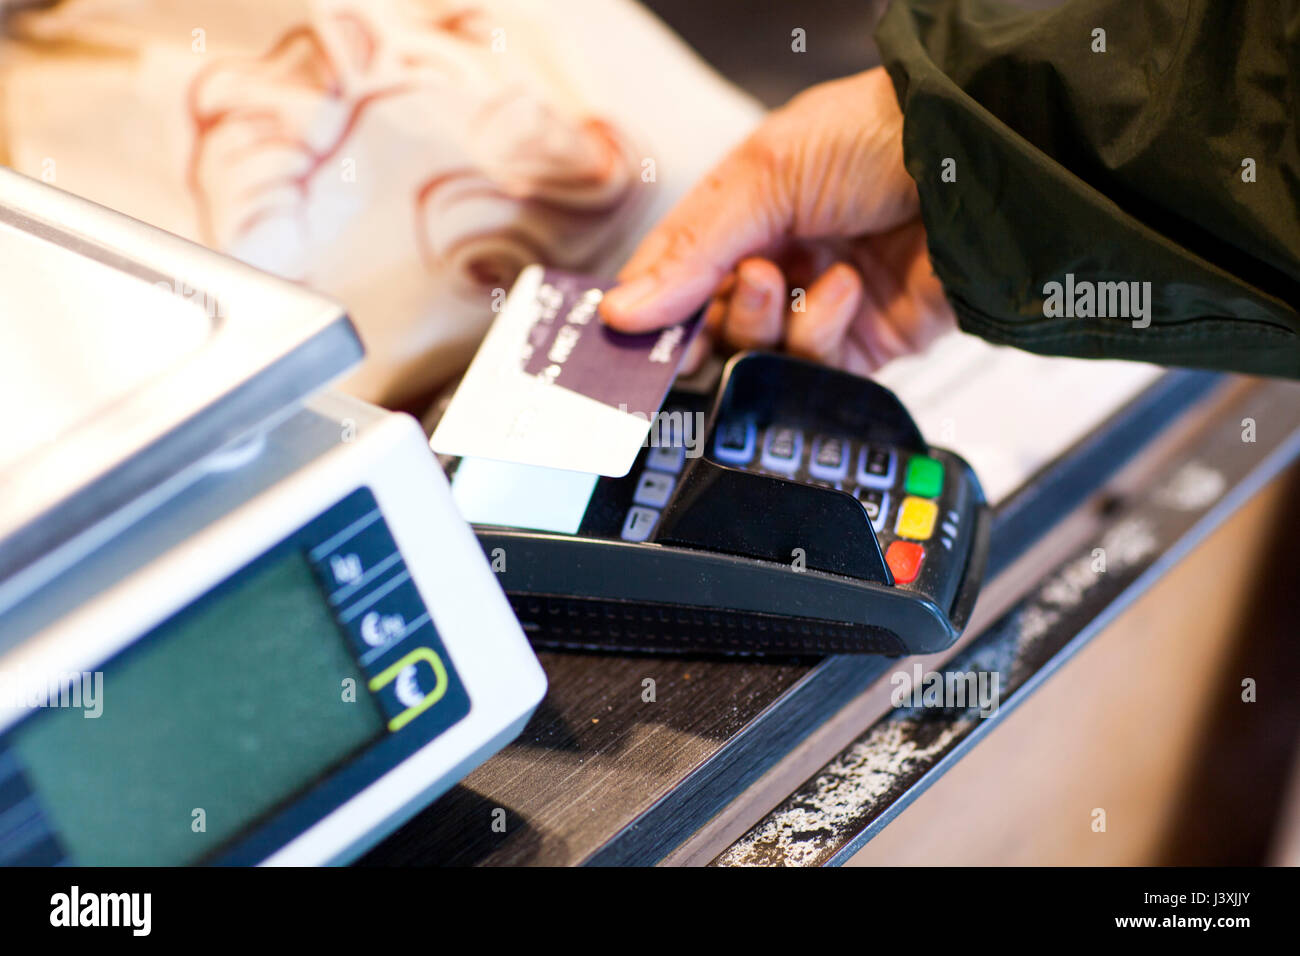 Cropped view of woman using a contactless payment credit card machine Stock Photo